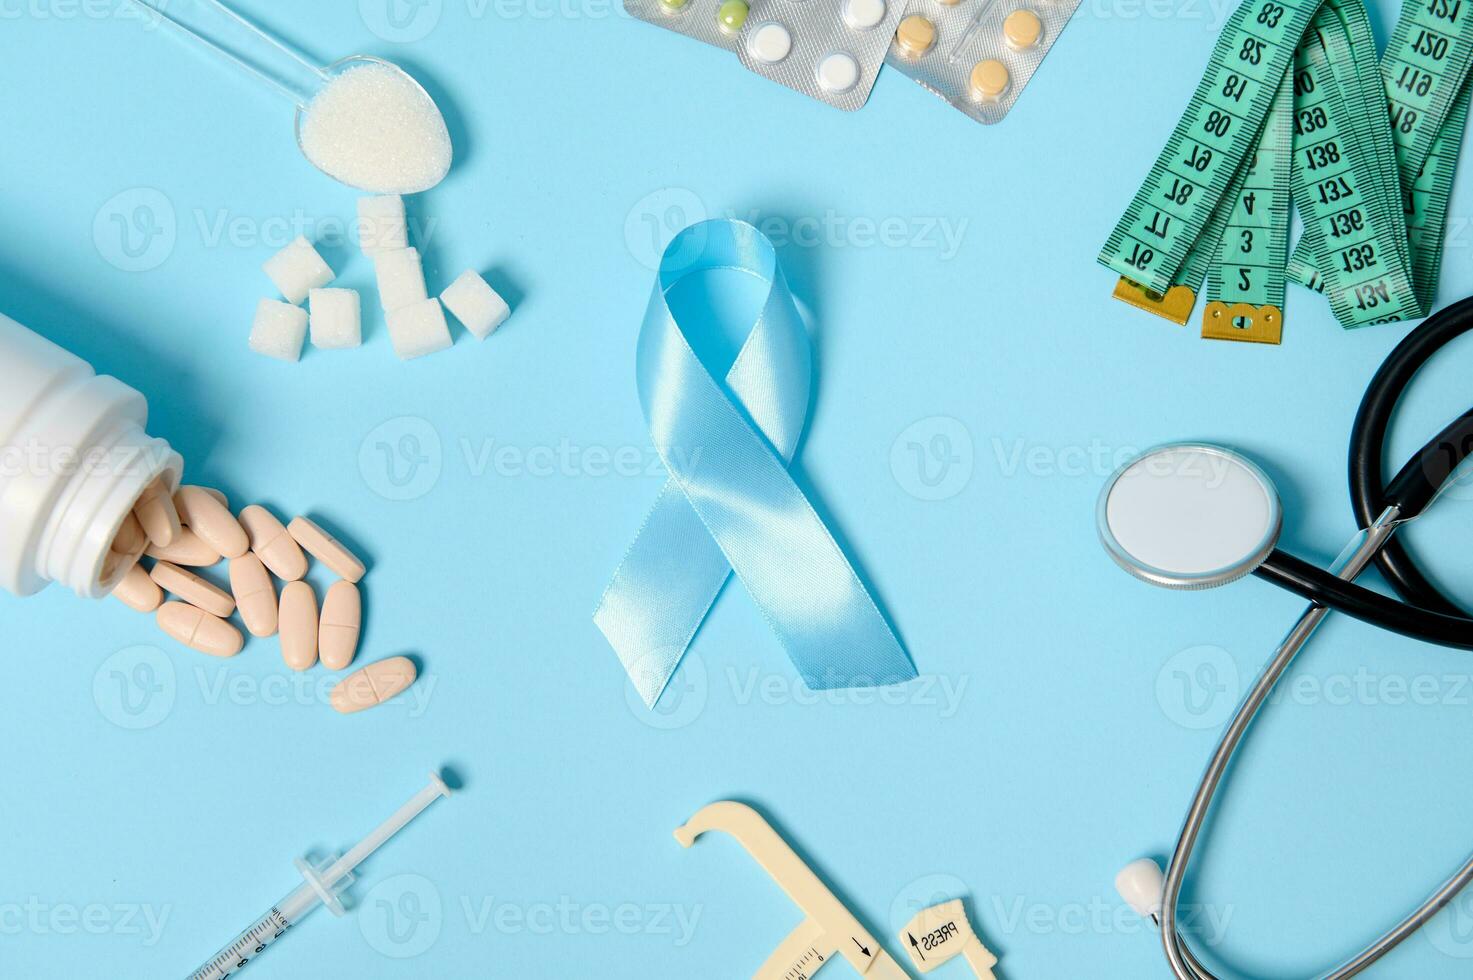 Blue Diabetes Awareness ribbon at colored background center with scattered pharmaceutical pills, blisters of tablets, insulin syringe, stethoscope, caliper , measuring tape and refined white sugar photo